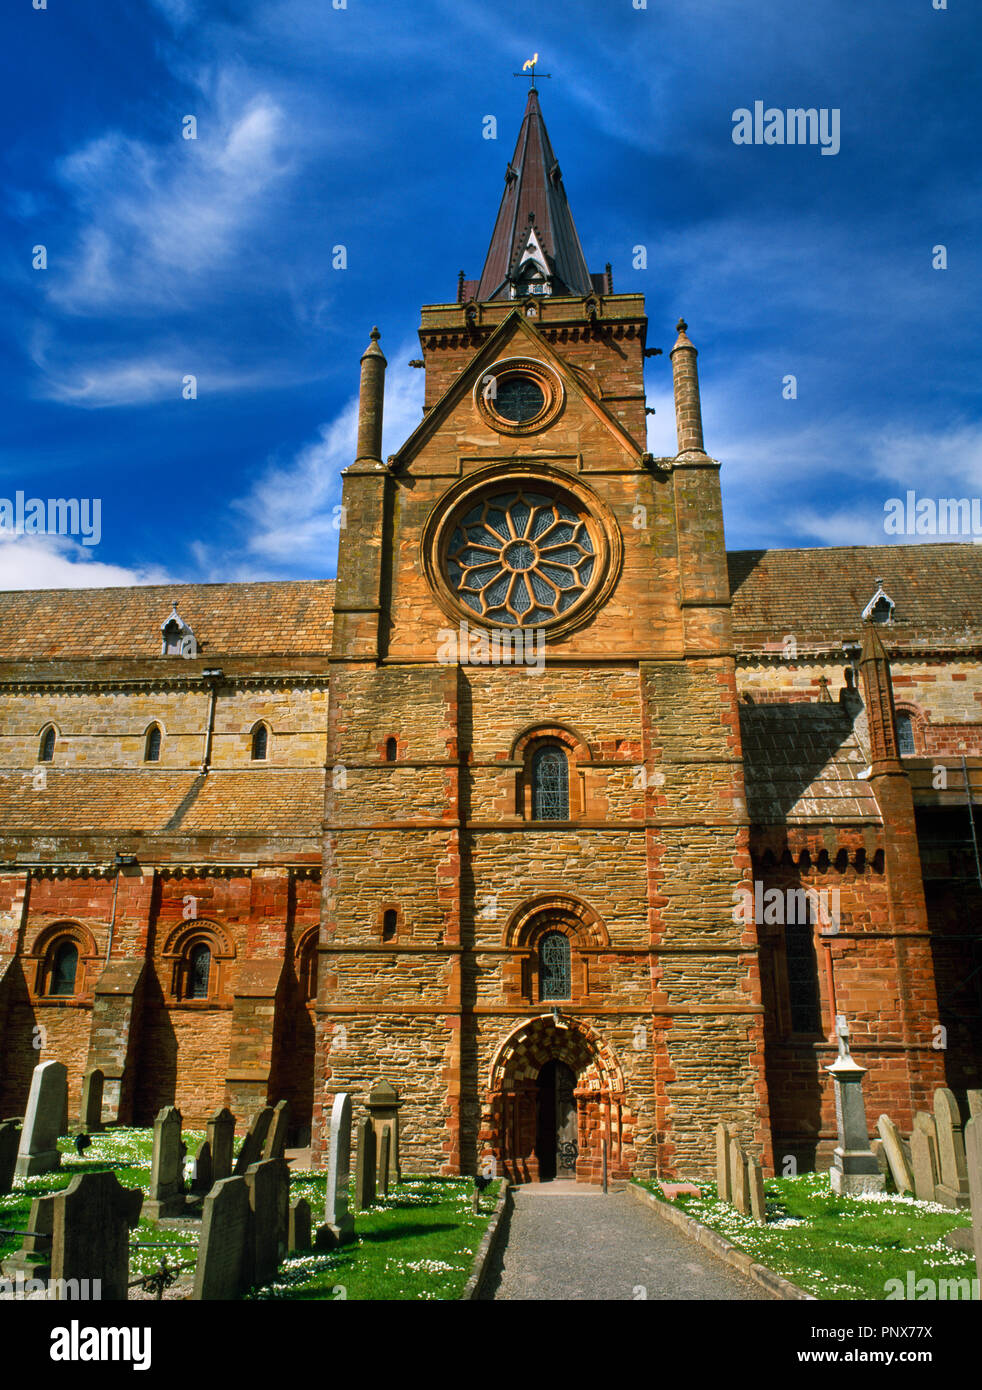 Exterior view looking N at S transept & central tower of St Magnus Cathedral, Kirkwall, Orkney, Scotland, UK, founded 1137 by Earl Rognvald Kolsson. Stock Photo